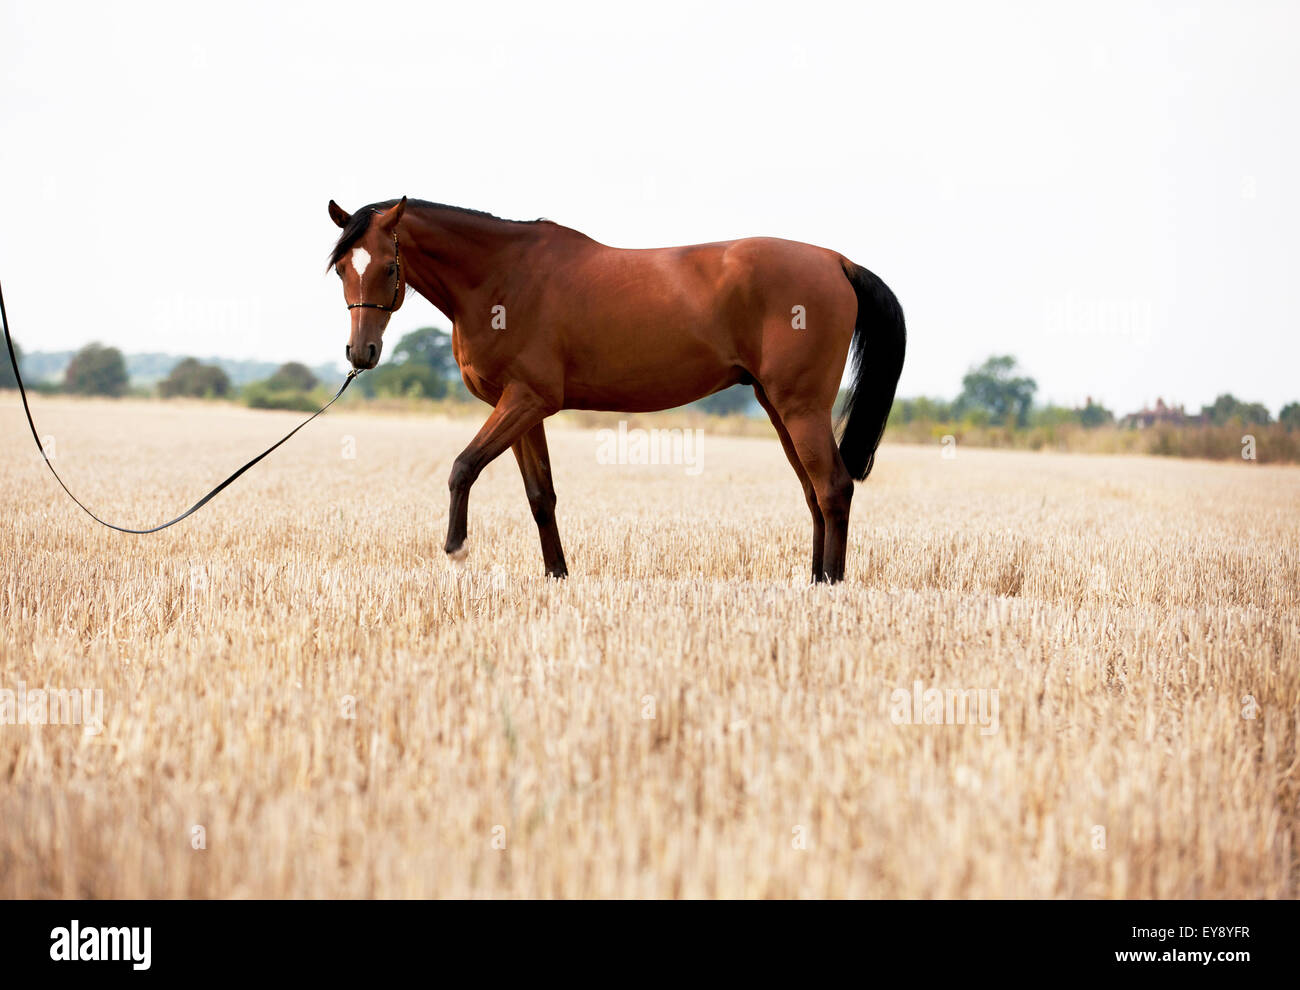 A bright bay pure bred Arabian horse standing in a stubble field Stock Photo